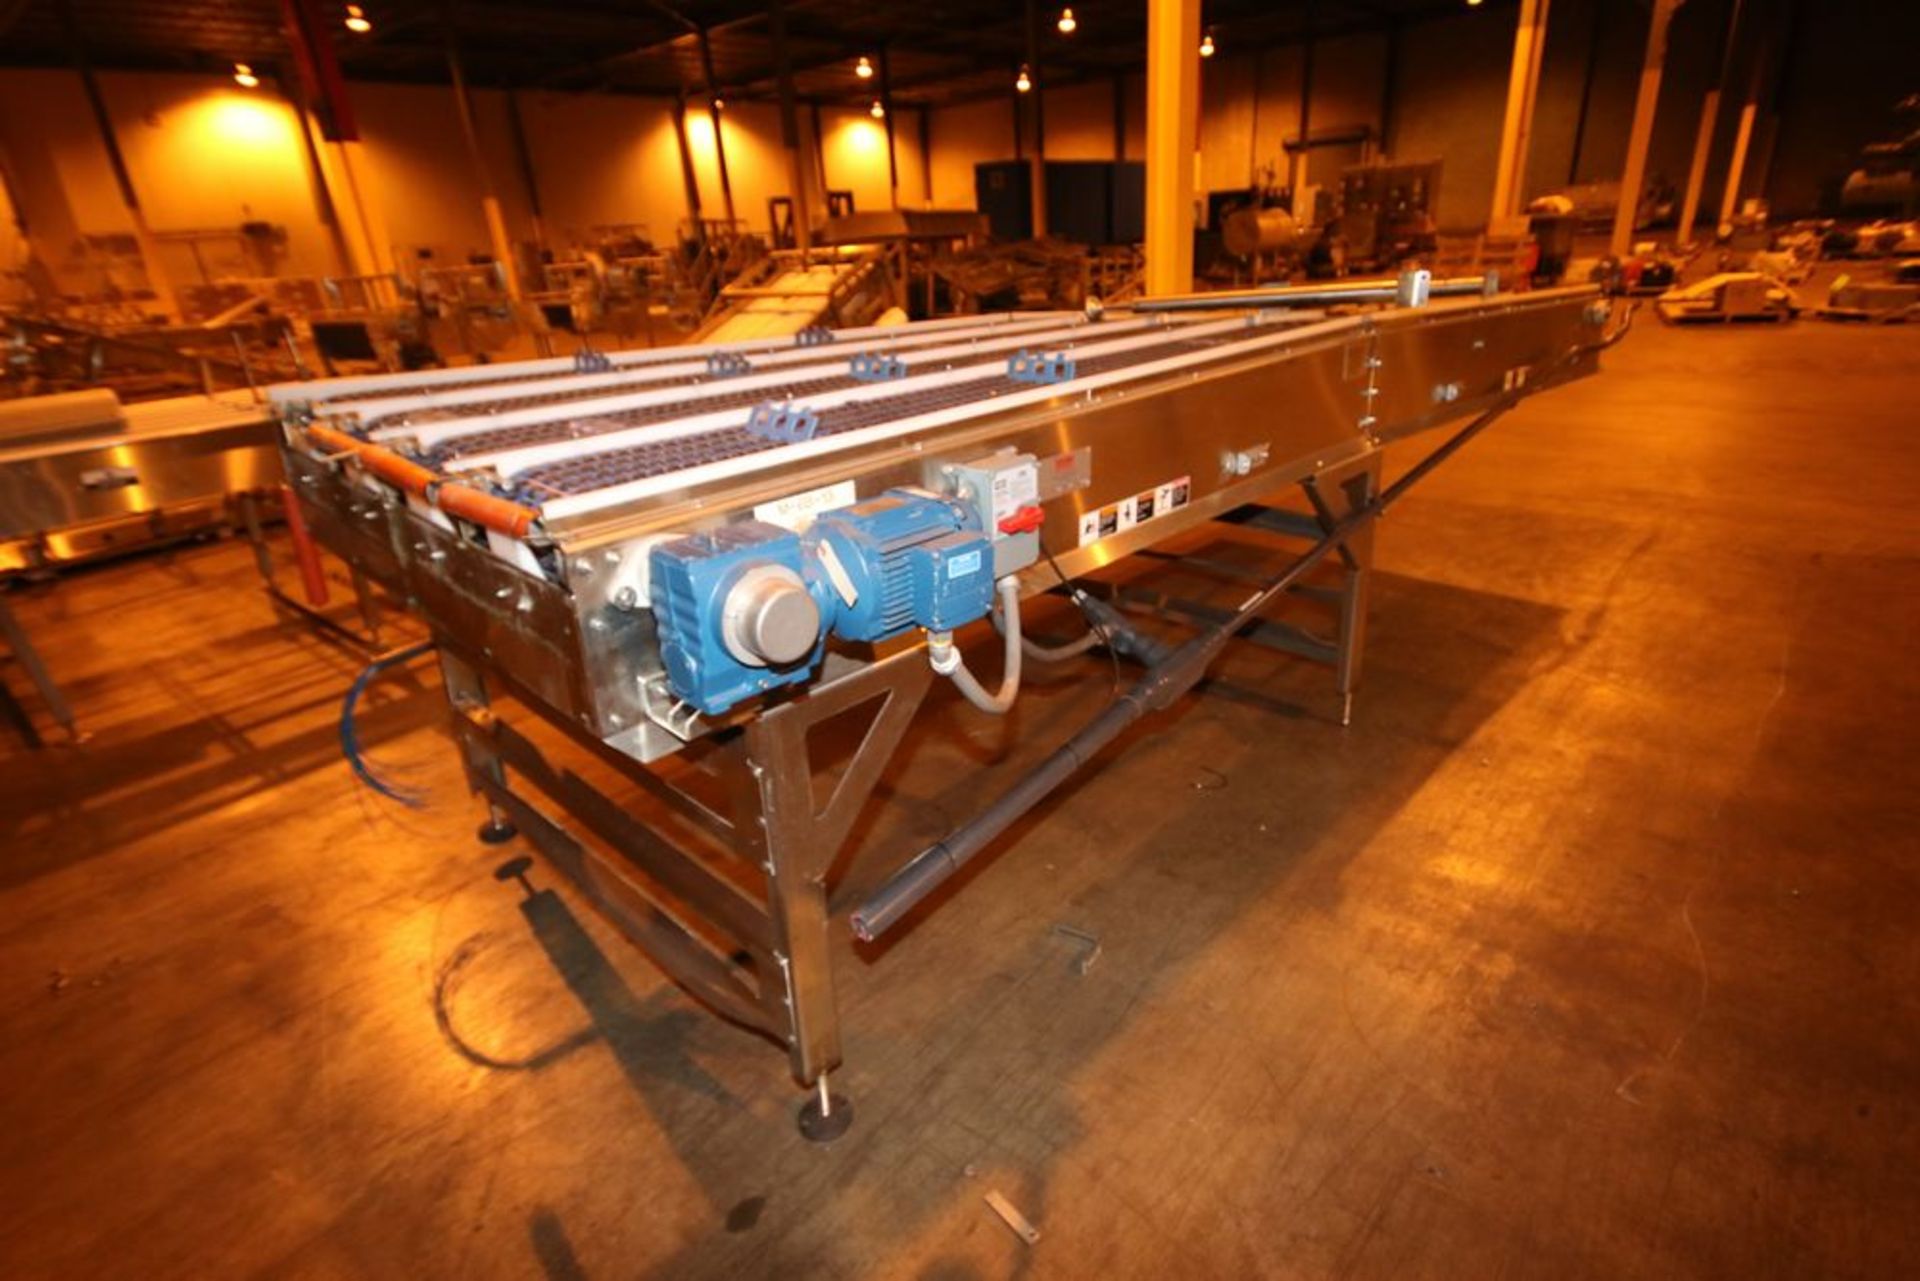 2012 Intralox 4-Lane S/S Conveyor, with SEW Drive, Lane Width: 12" W, Overall Dims.: Aprox. 14' L - Image 4 of 6